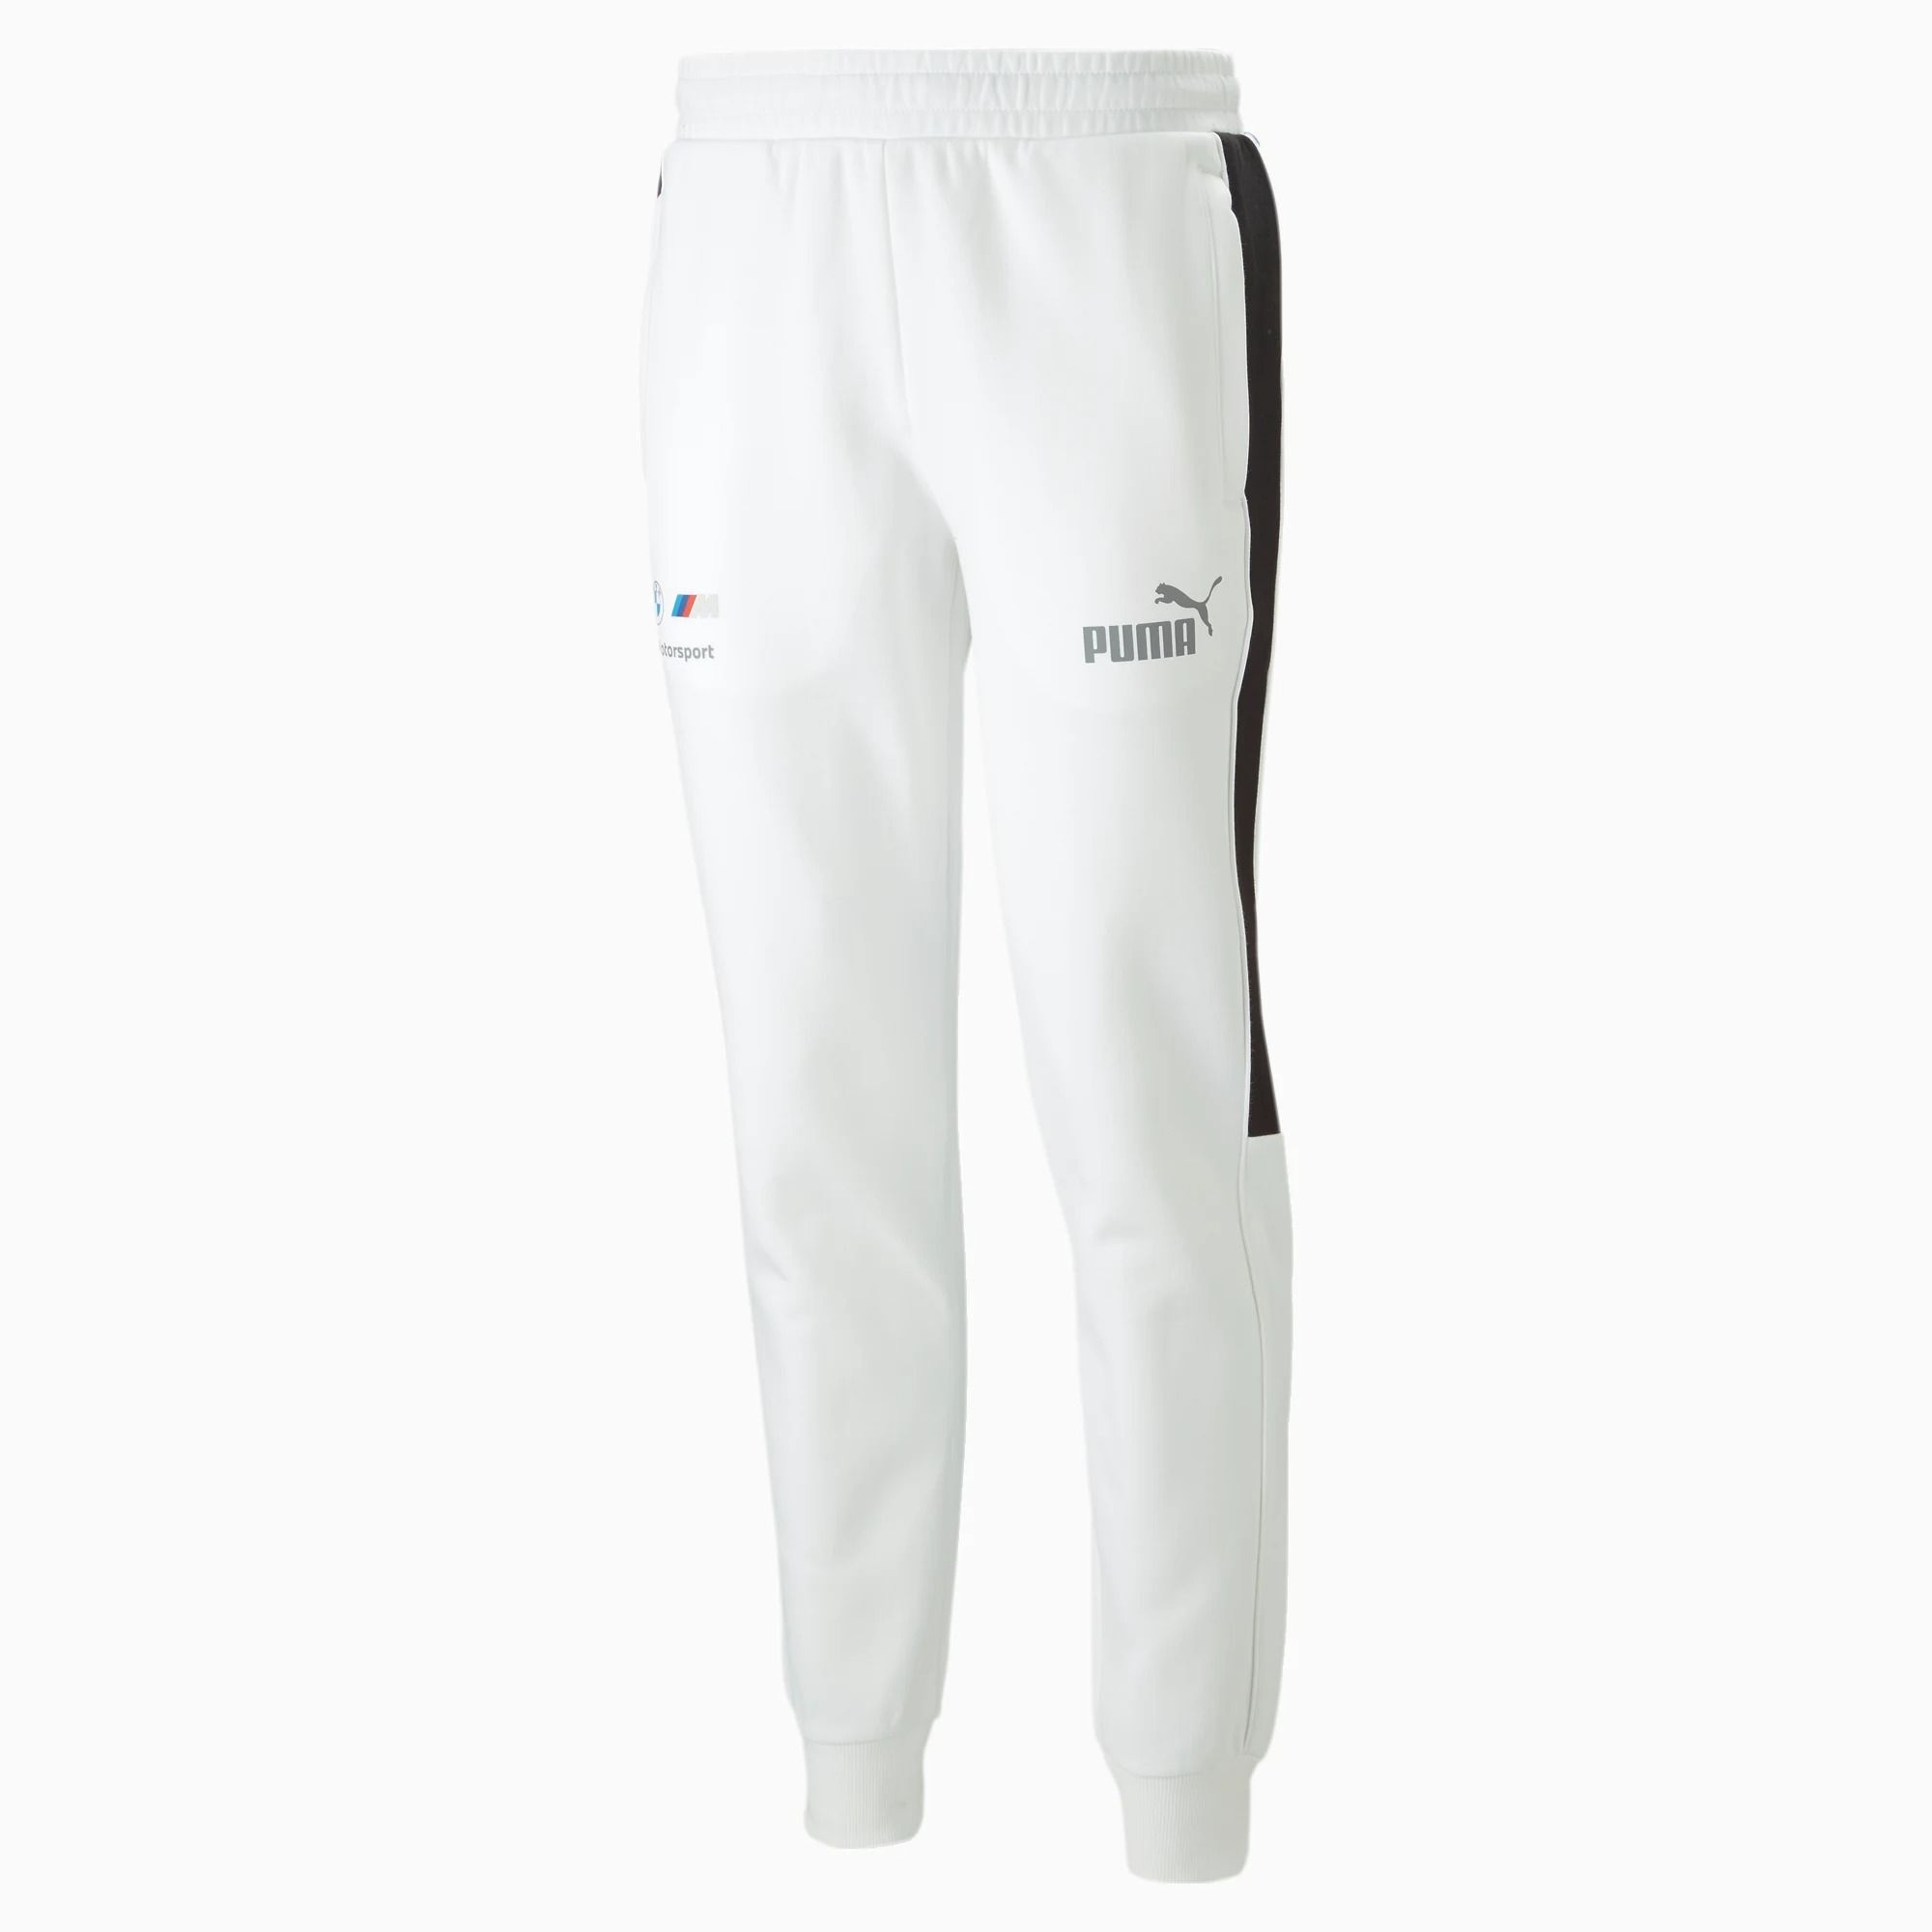 What Are Nike's Best Sweatpants?. Nike.com